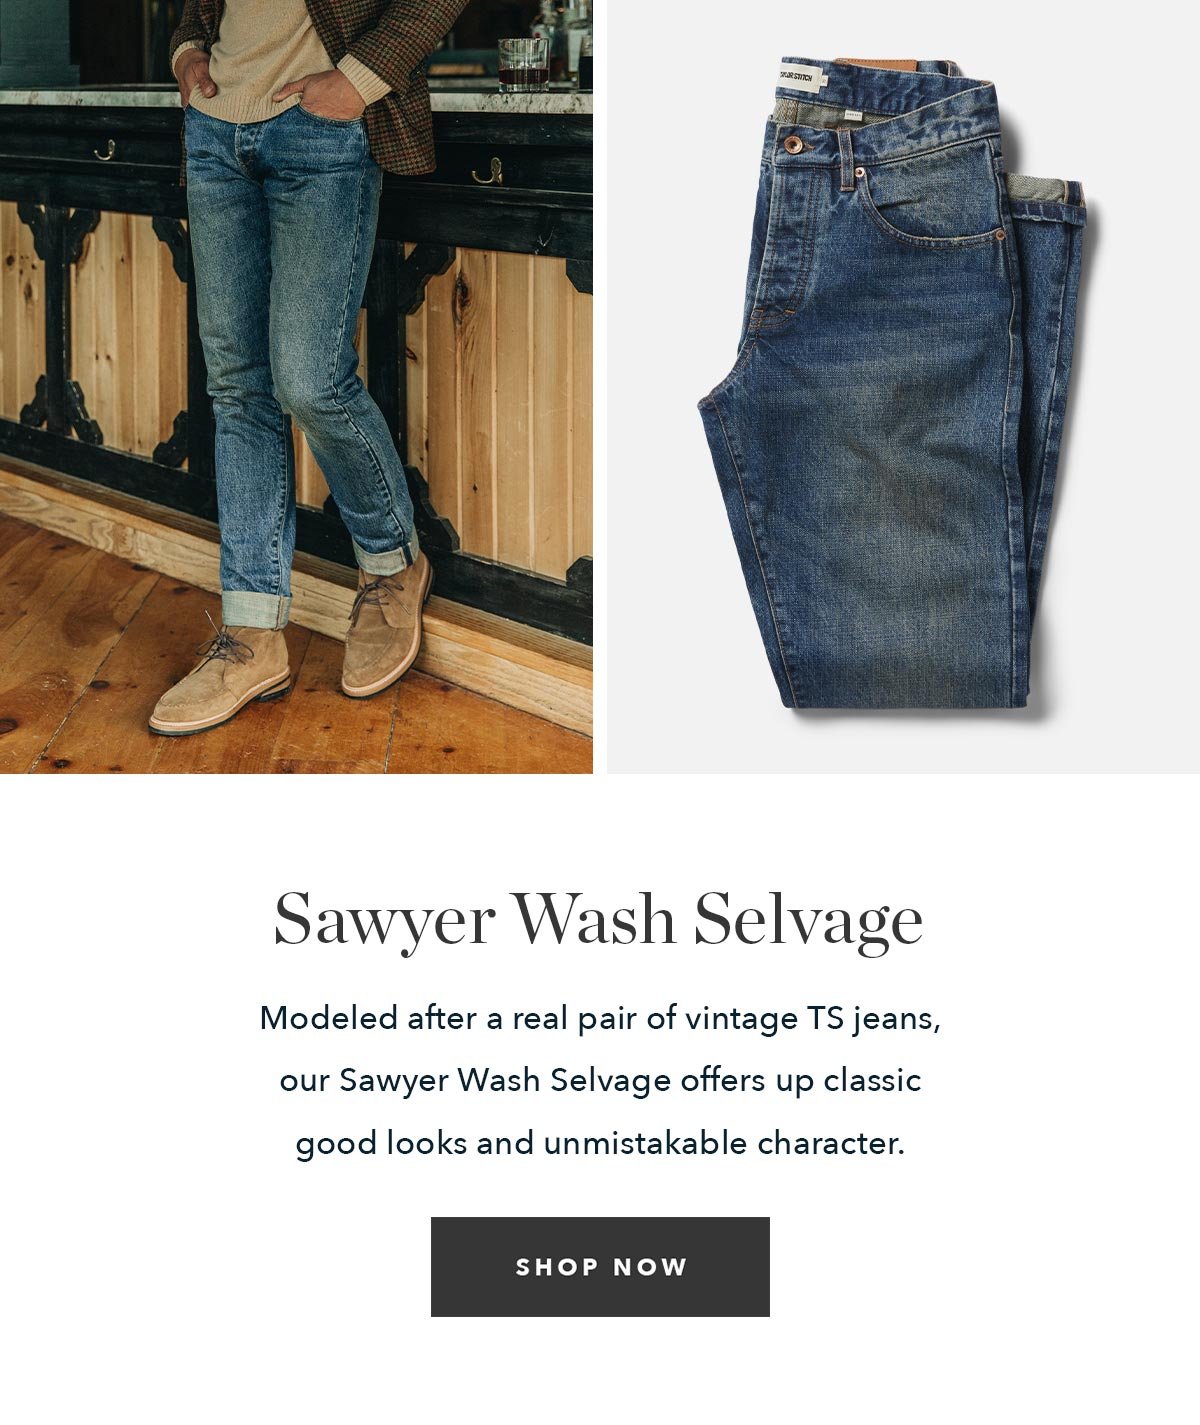 Sawyer Wash Selvage: Modeled after a real pair of vintage TS jeans, our Sawyer Wash Selvage offers up classic good looks and unmistakable character. 